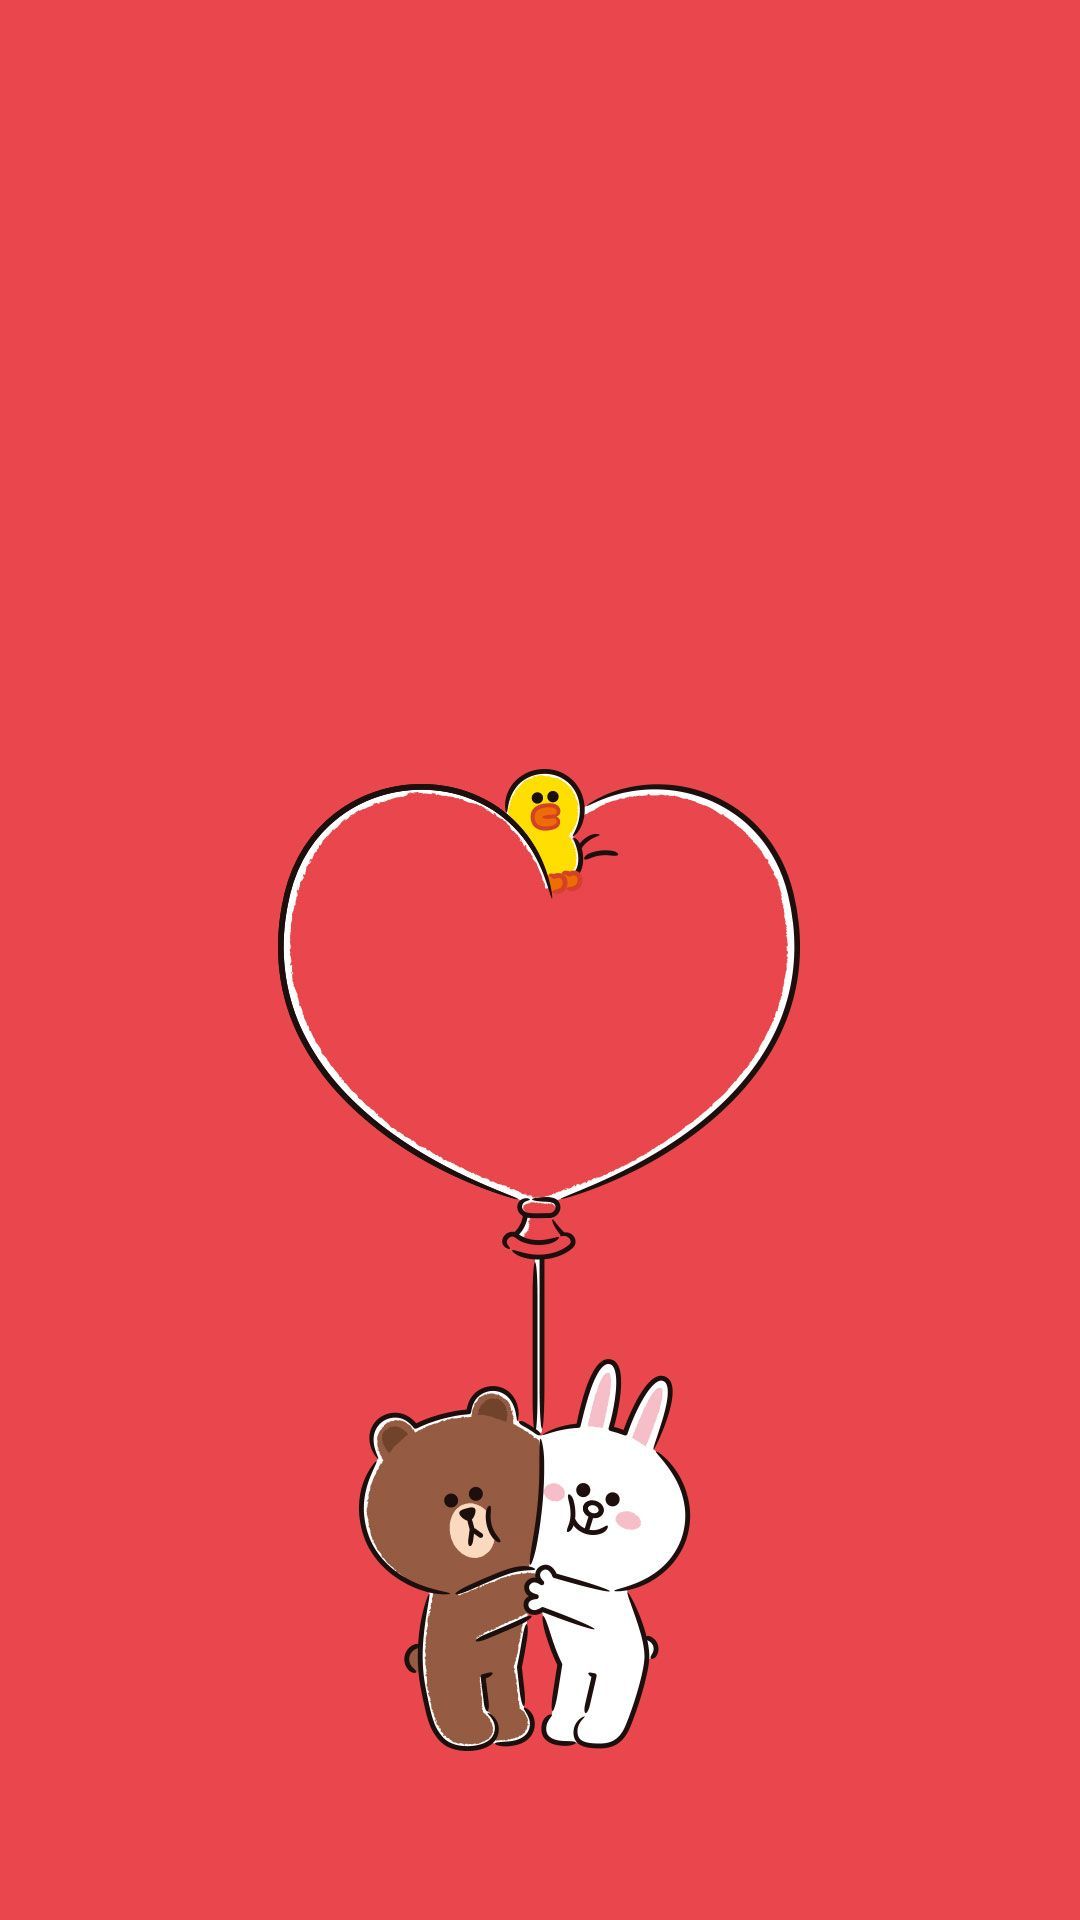 Brown And Cony Wallpapers